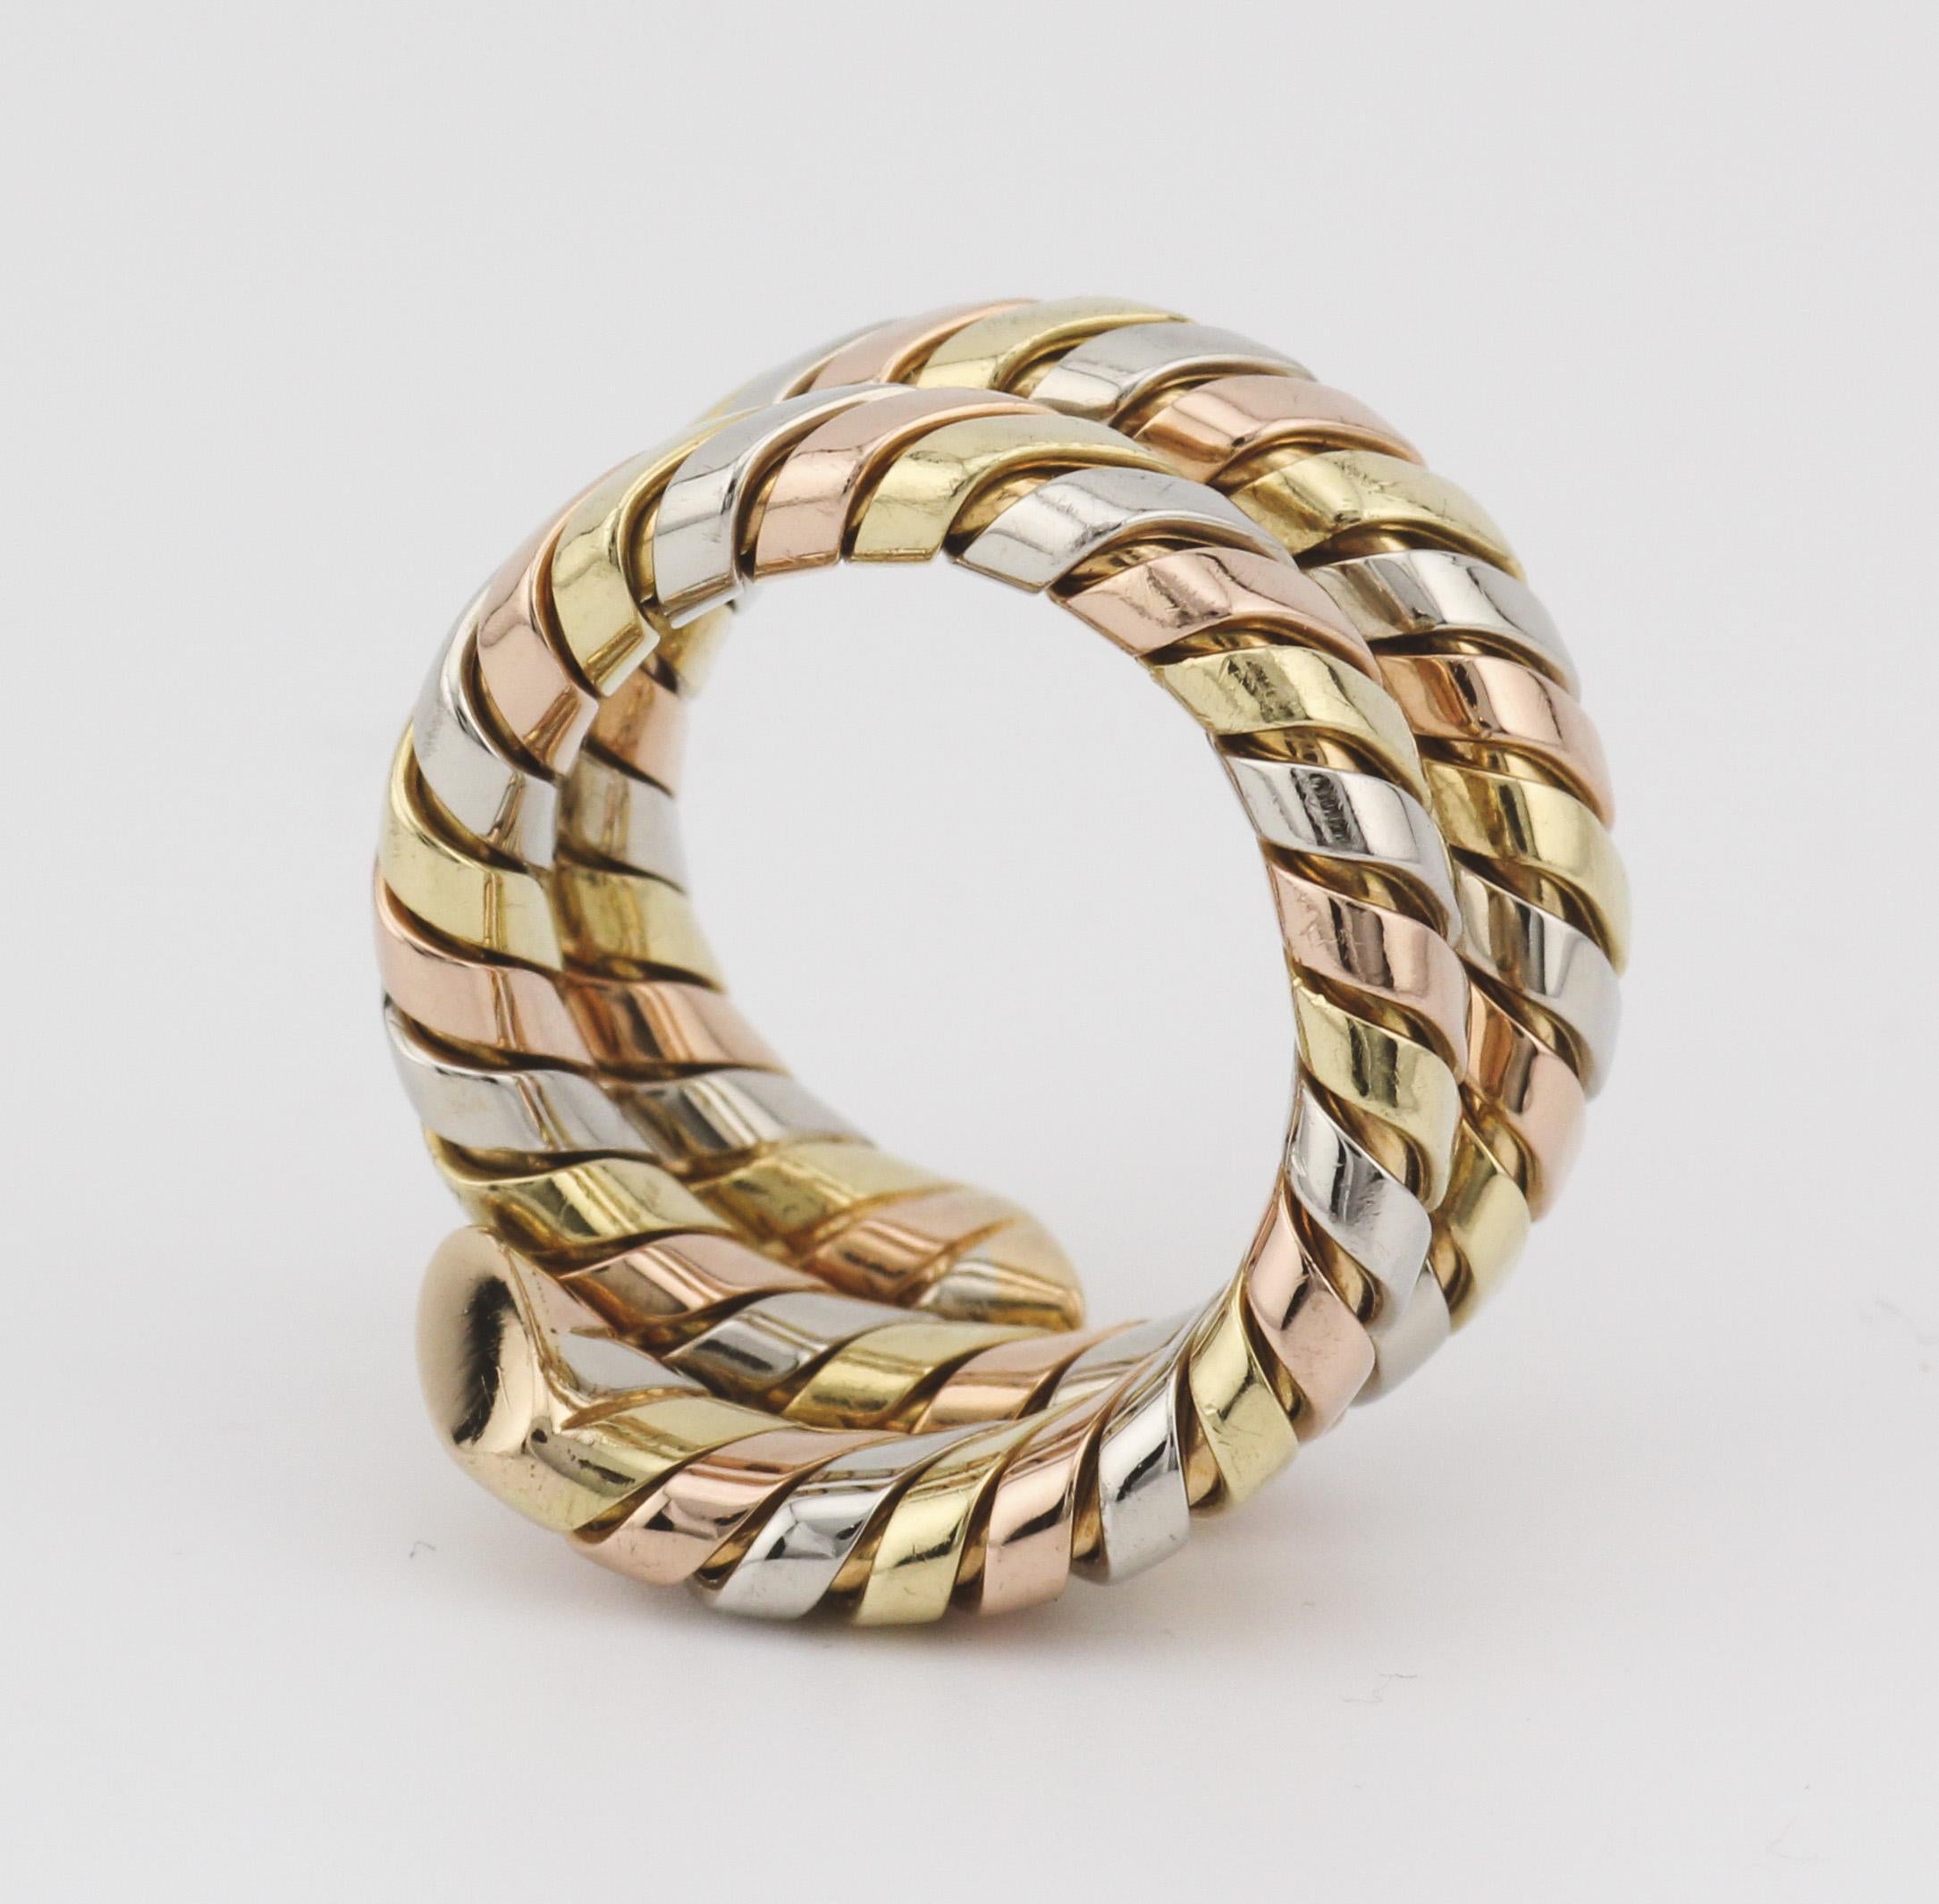 Bulgari Tubogas 3 Color 18K Gold Flexible Snake Ring Size 6.5 In Good Condition For Sale In Bellmore, NY